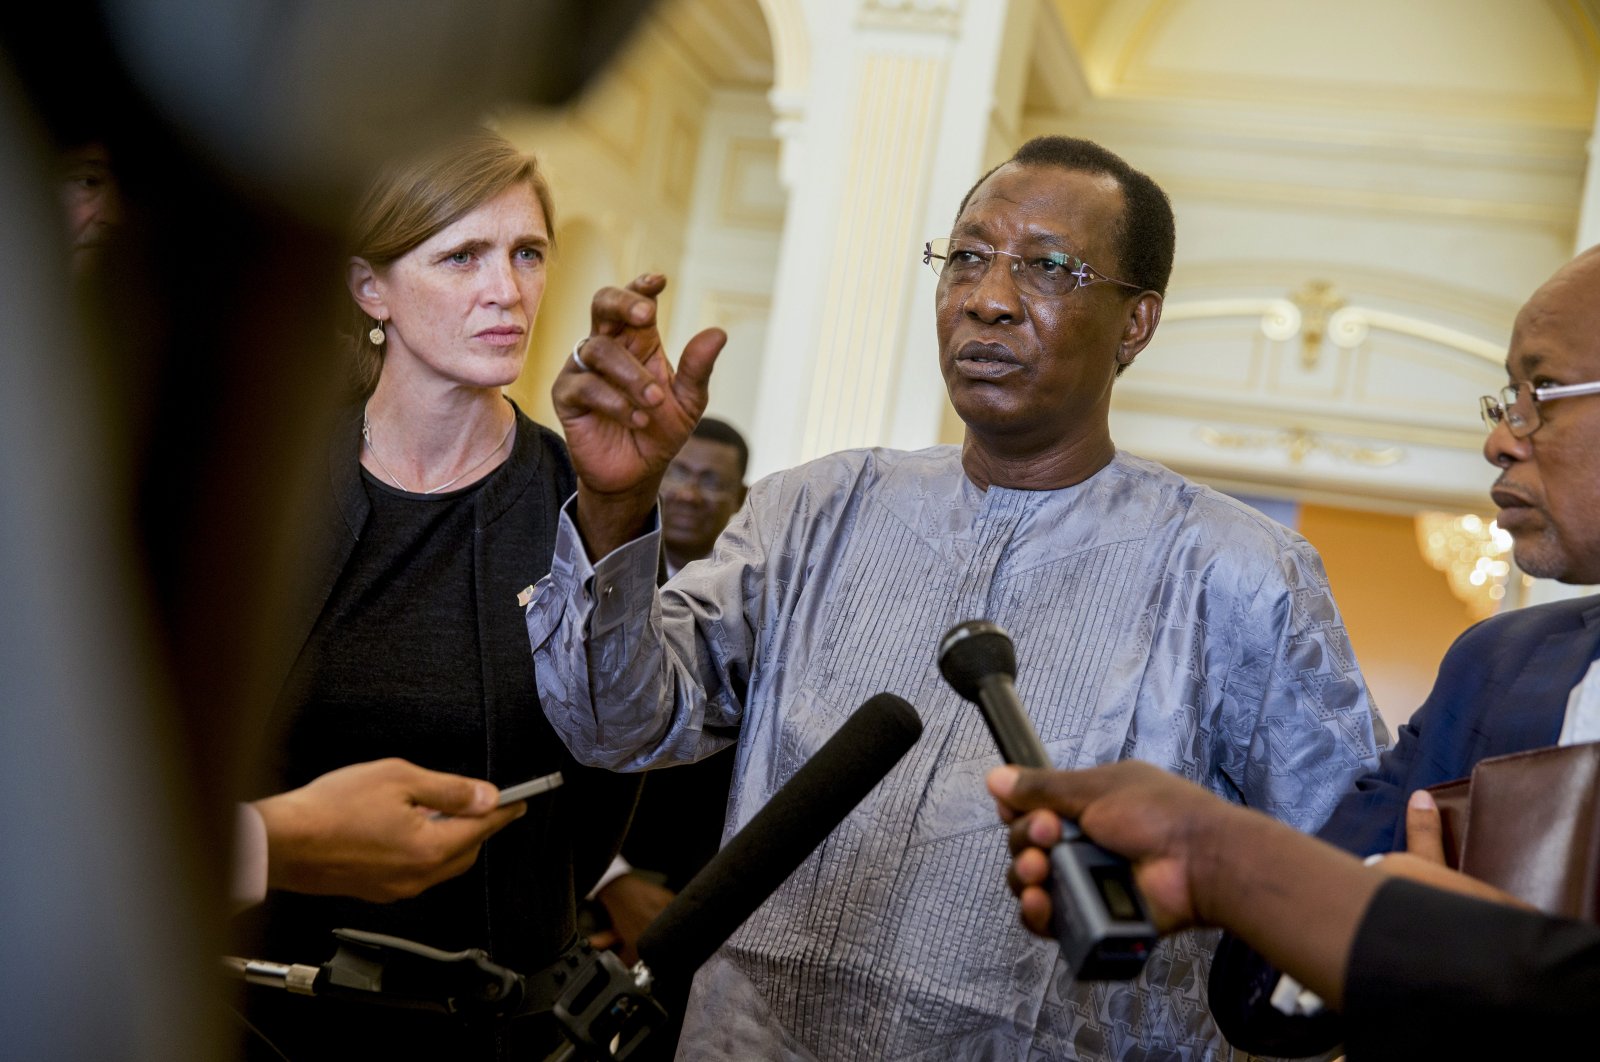 U.S. Ambassador to the United Nations Samantha Power (L) listens to Chad President Idriss Deby Itno (C) answer questions from members of the media at the presidential palace in N'Djamena, Chad, April 20, 2016. (AP File Photo)